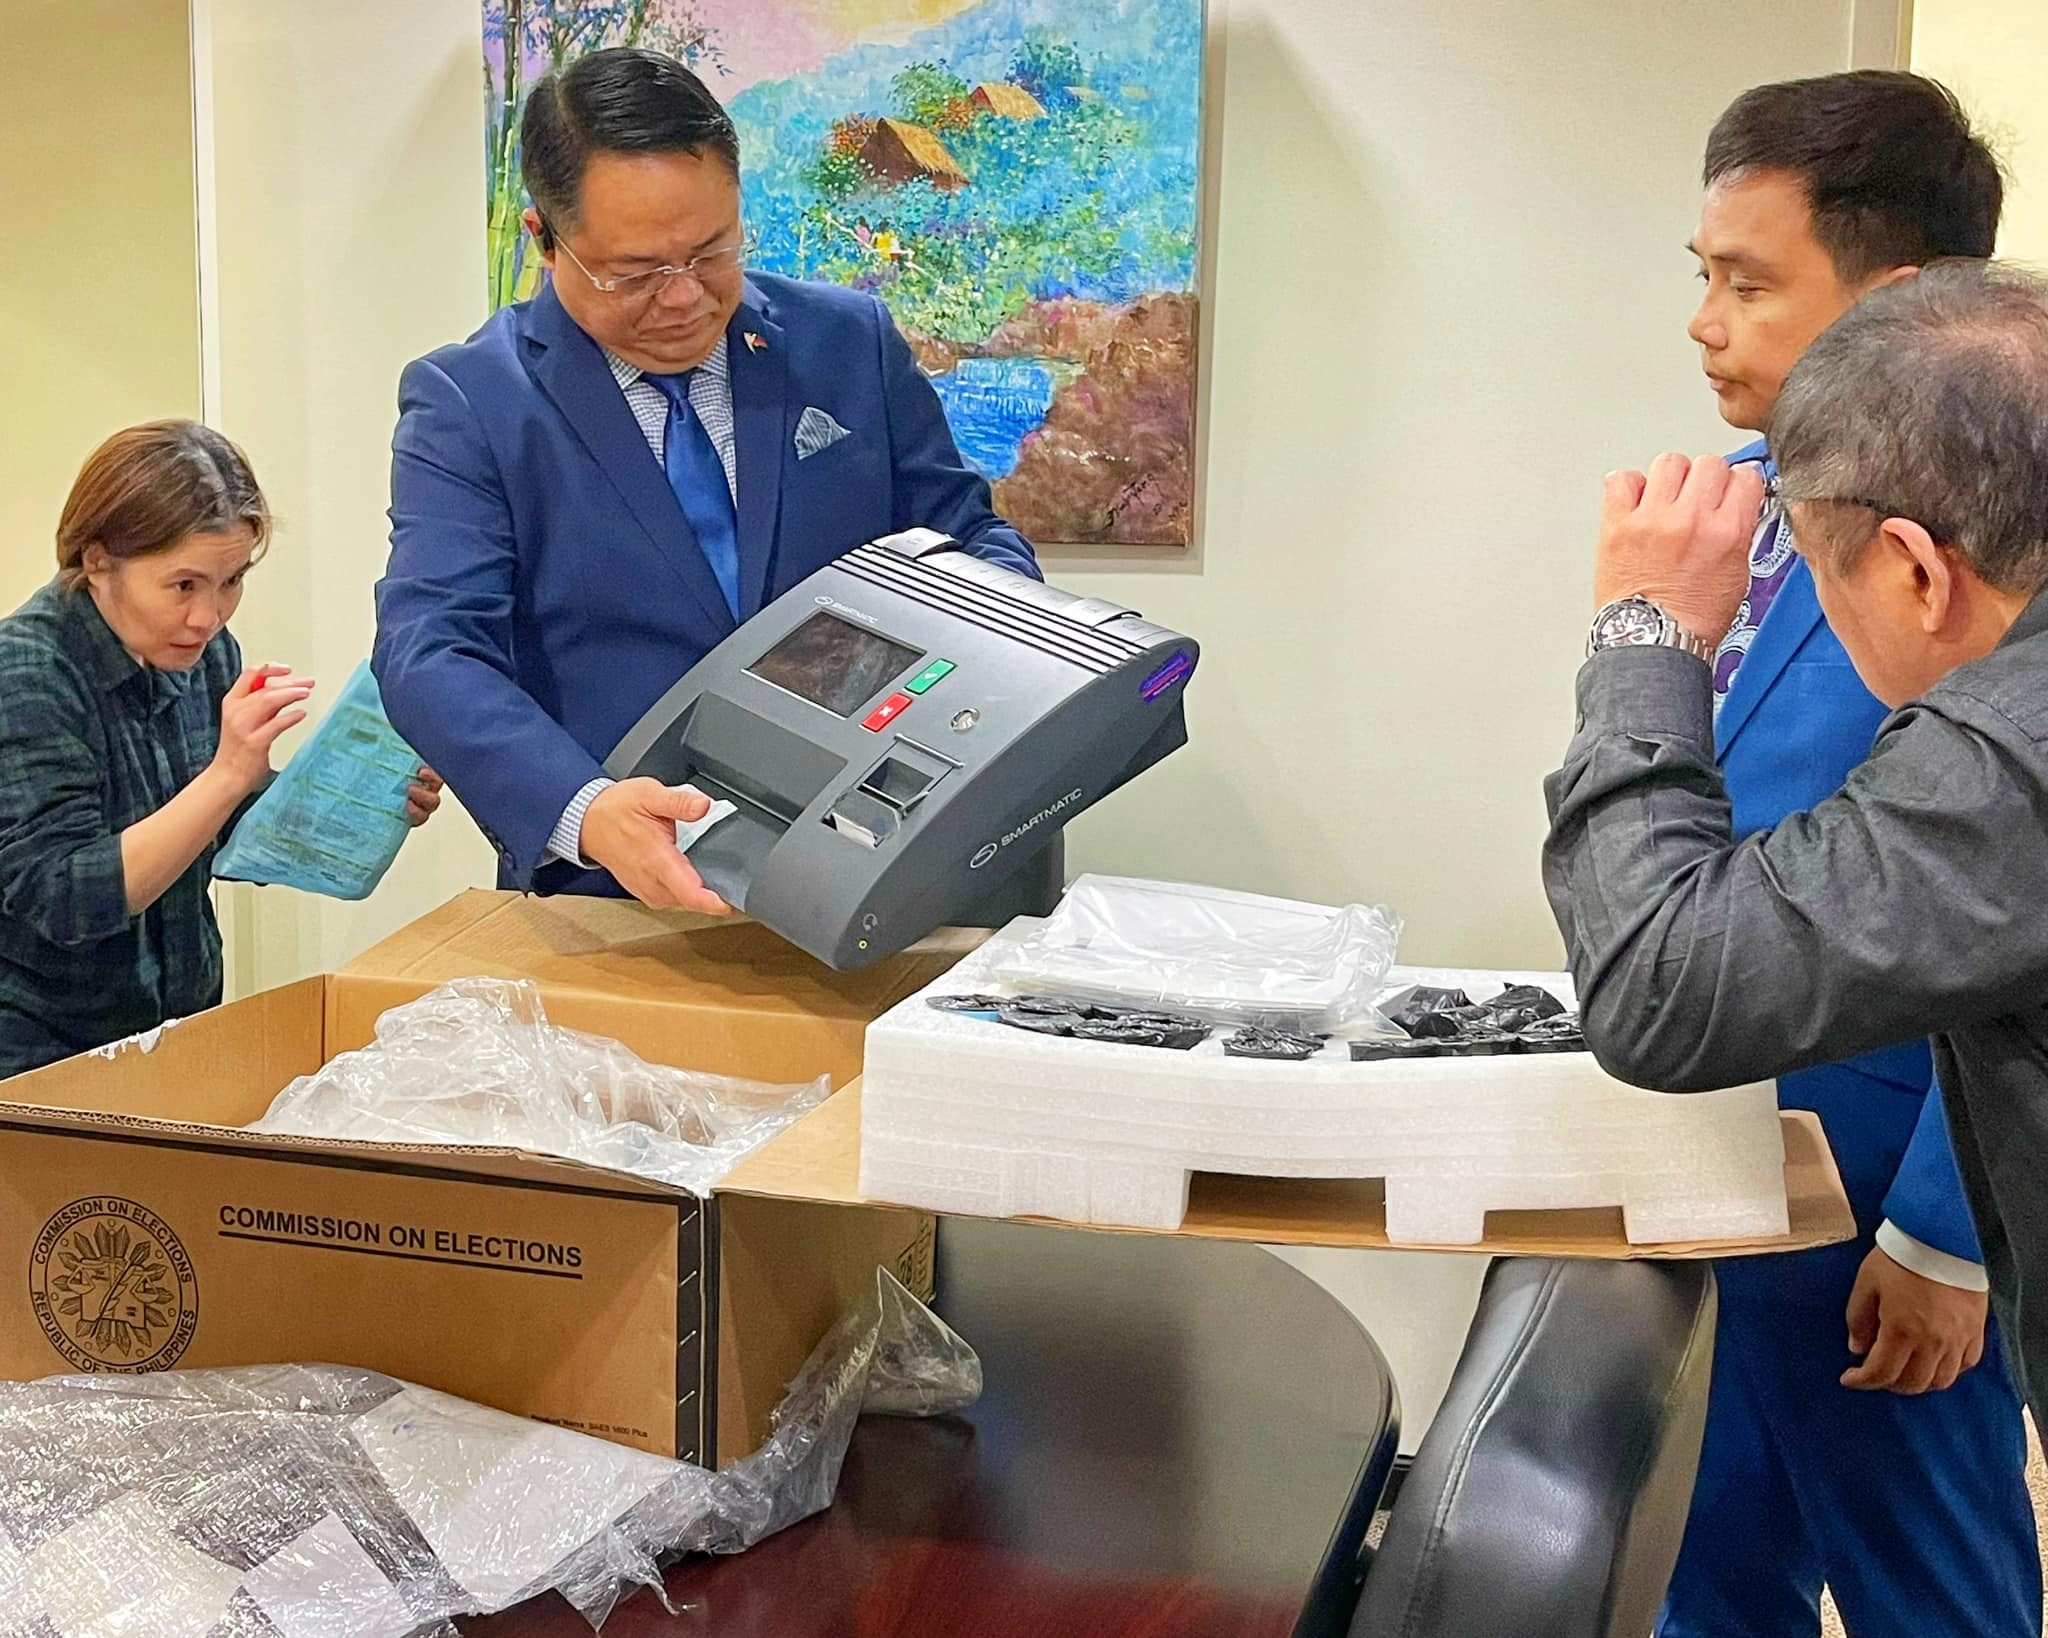 Overseas voting delayed in at least 6 posts – Comelec